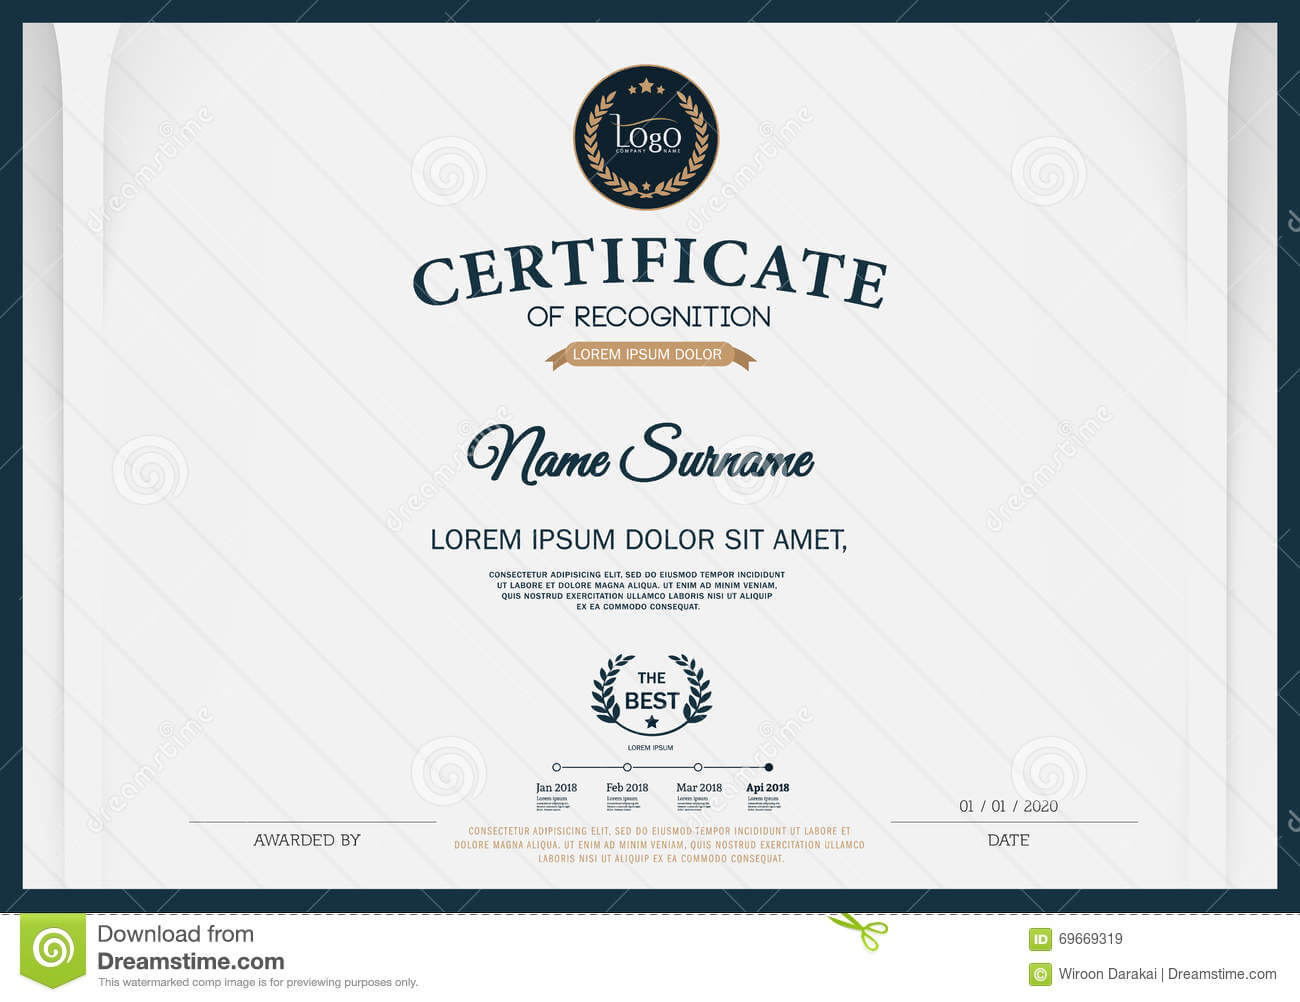 Certificate Of Recognition Frame Design Template Layout Pertaining To Certificate Template Size